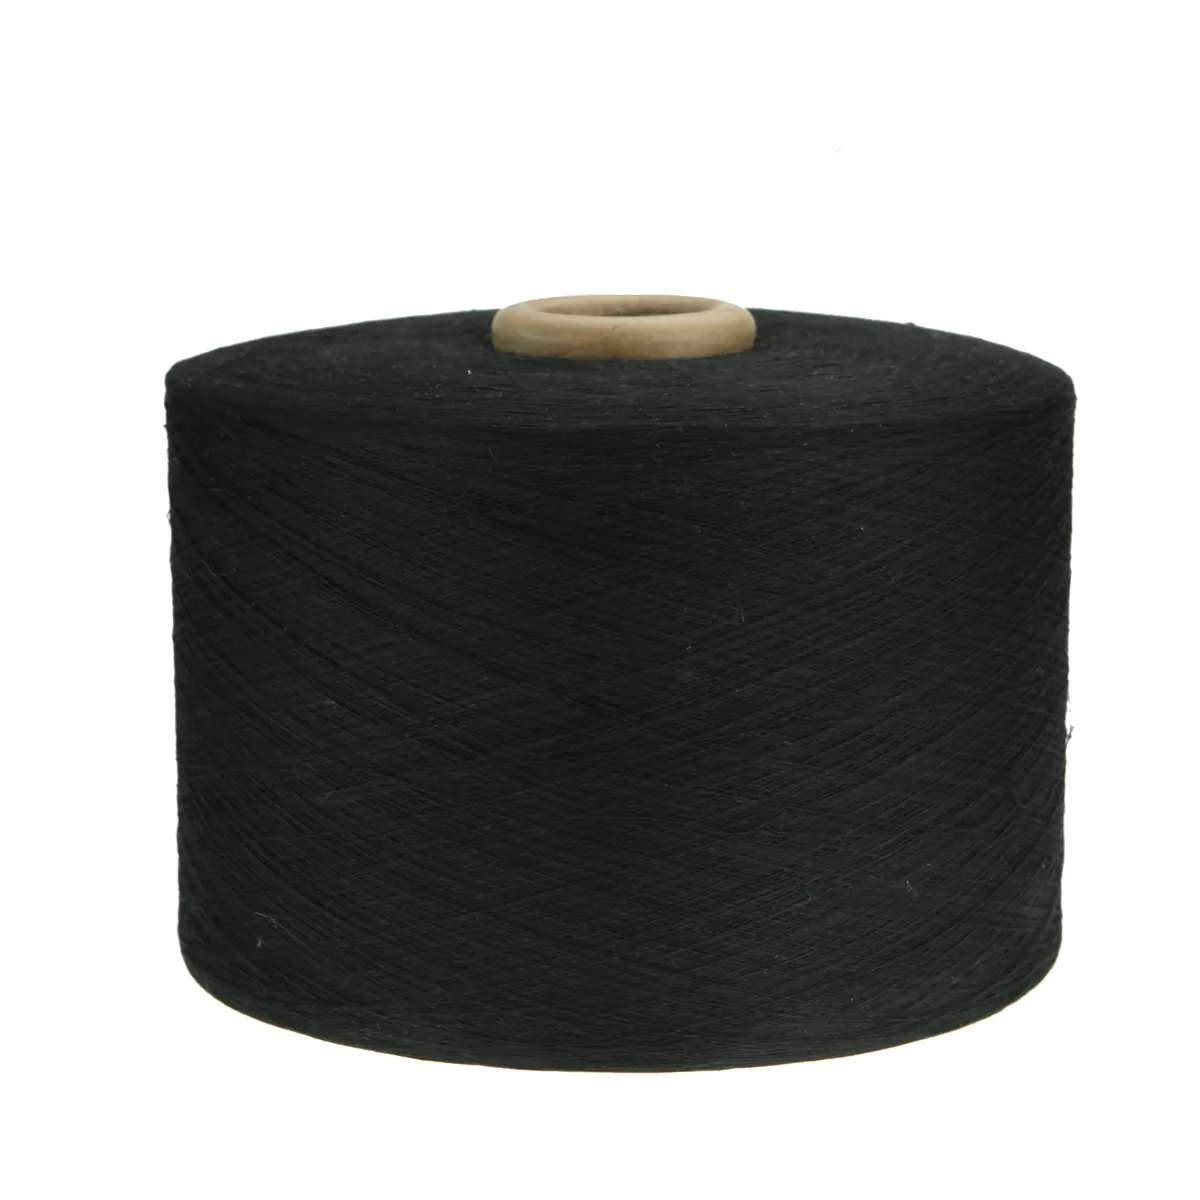 T/C Recycled Yarn Polyester Cotton Blended Yarn for Blankets Rugs Carpets